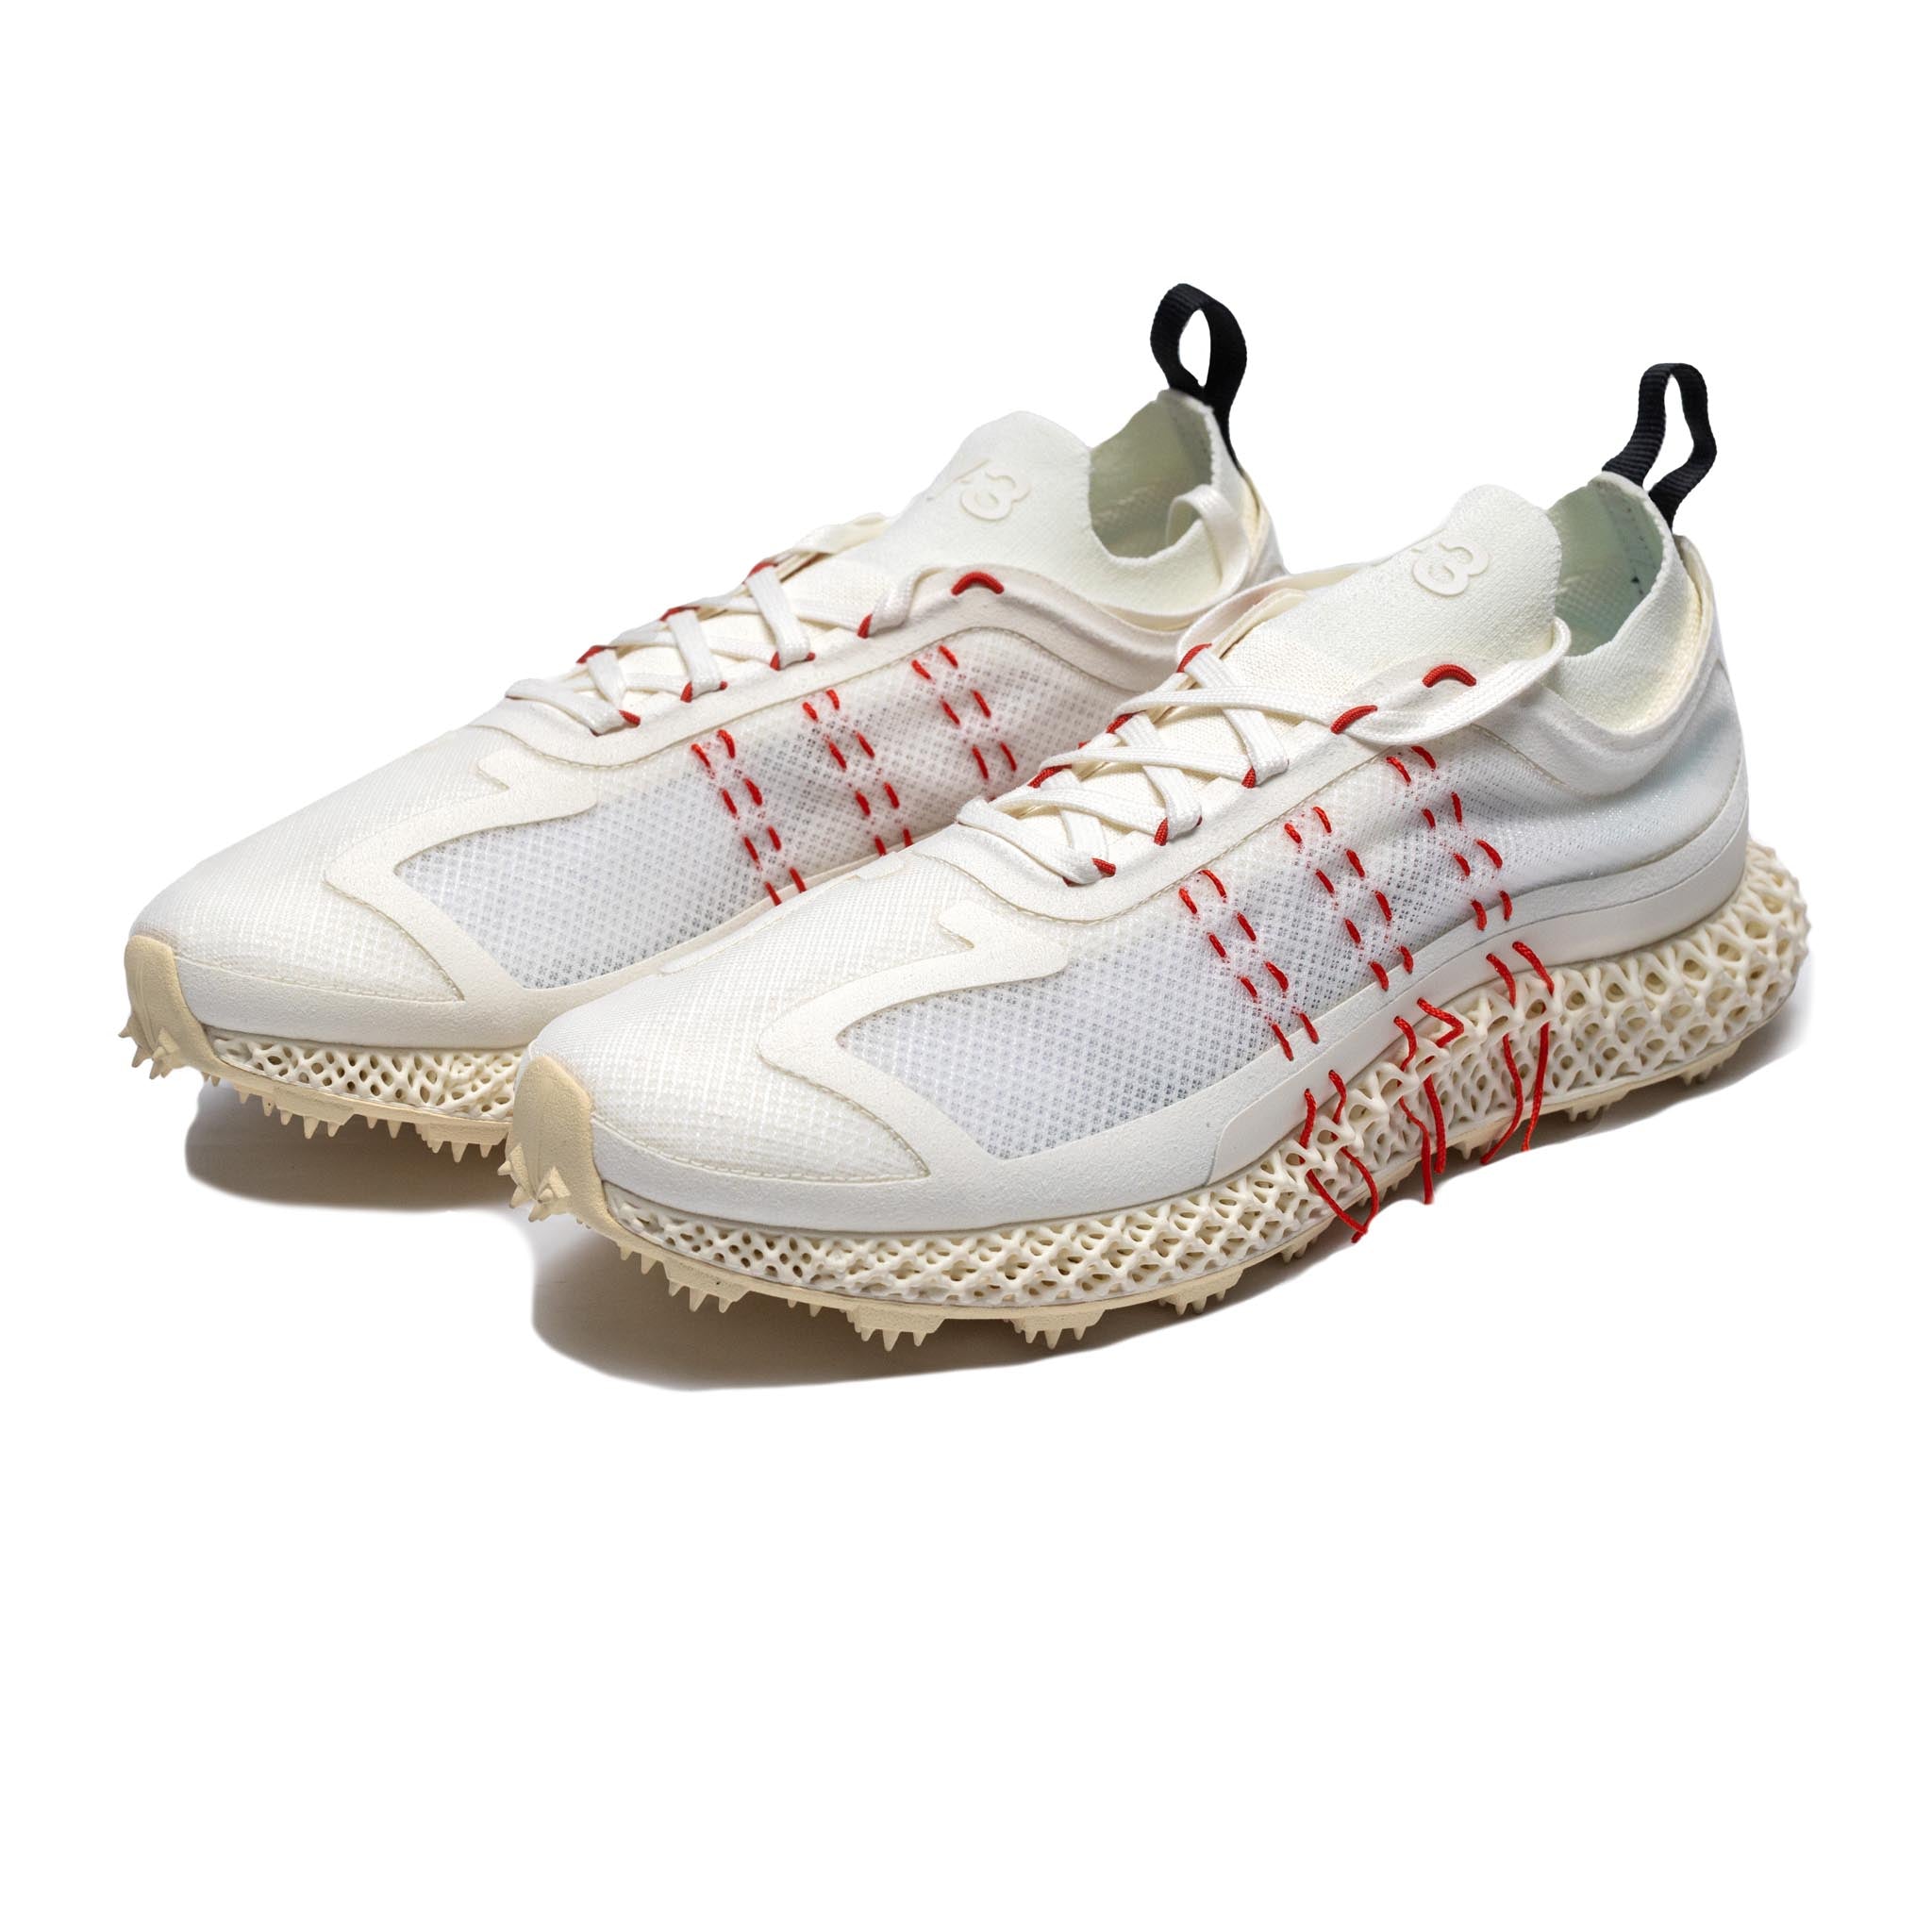 ADIDAS Y-3 Runner 4D Halo White/Red